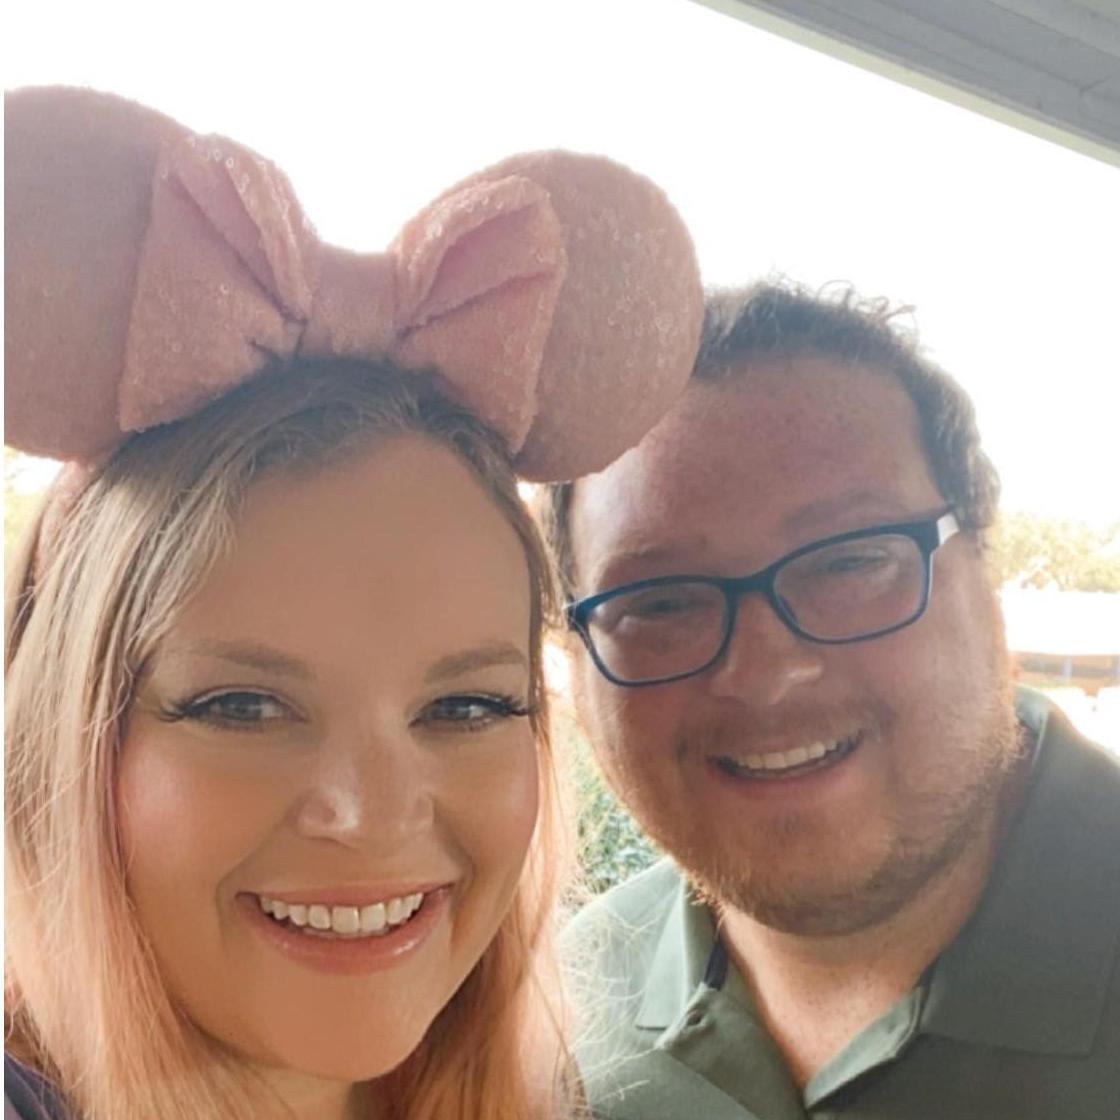 Our second trip to Disney - this picture was taken the same day Ben proposed!